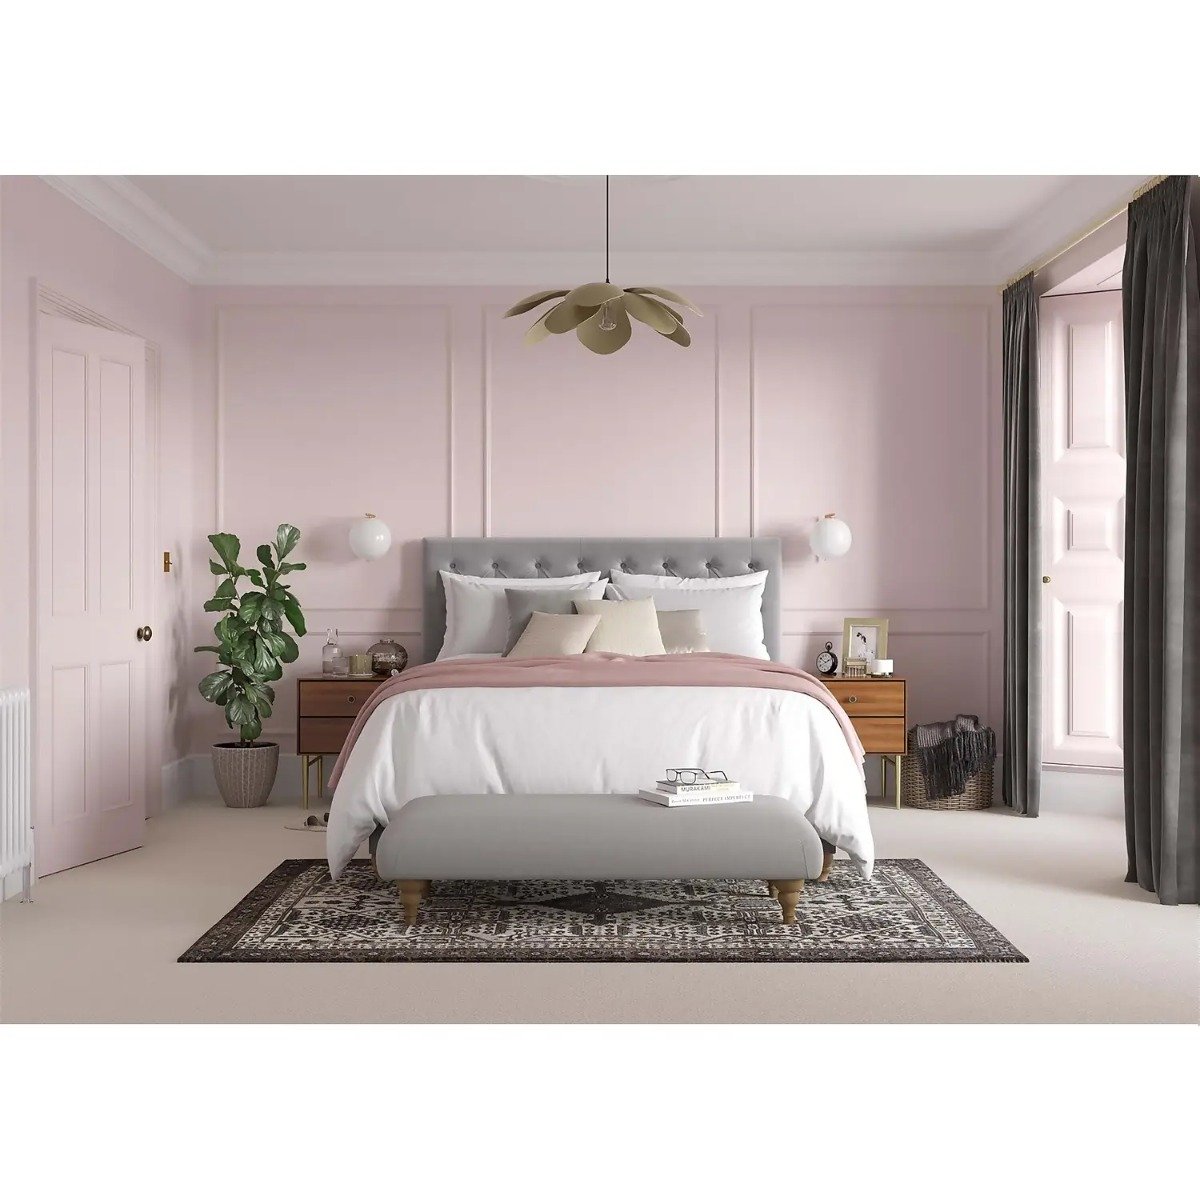 Dulux Heritage Potters Pink